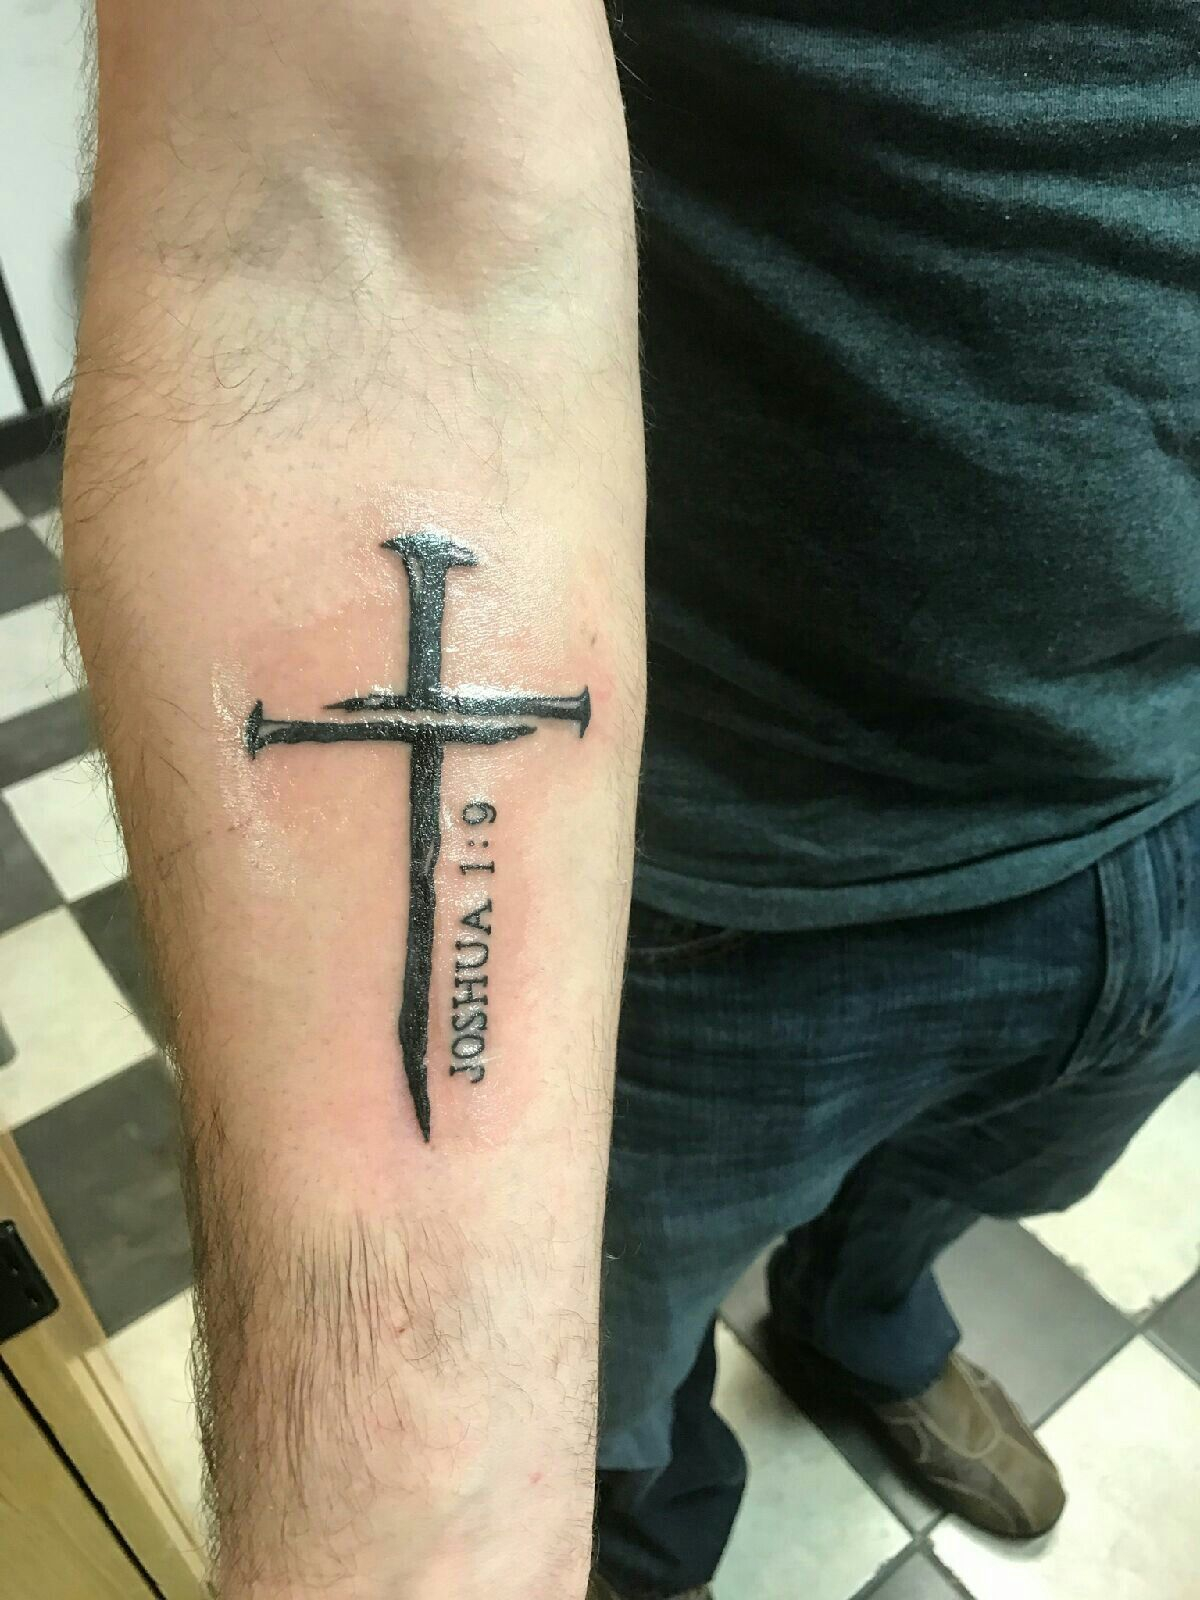 My Nail Cross Tattoo With Joshua 19 Ink Cross Tattoo Designs with regard to dimensions 1200 X 1600